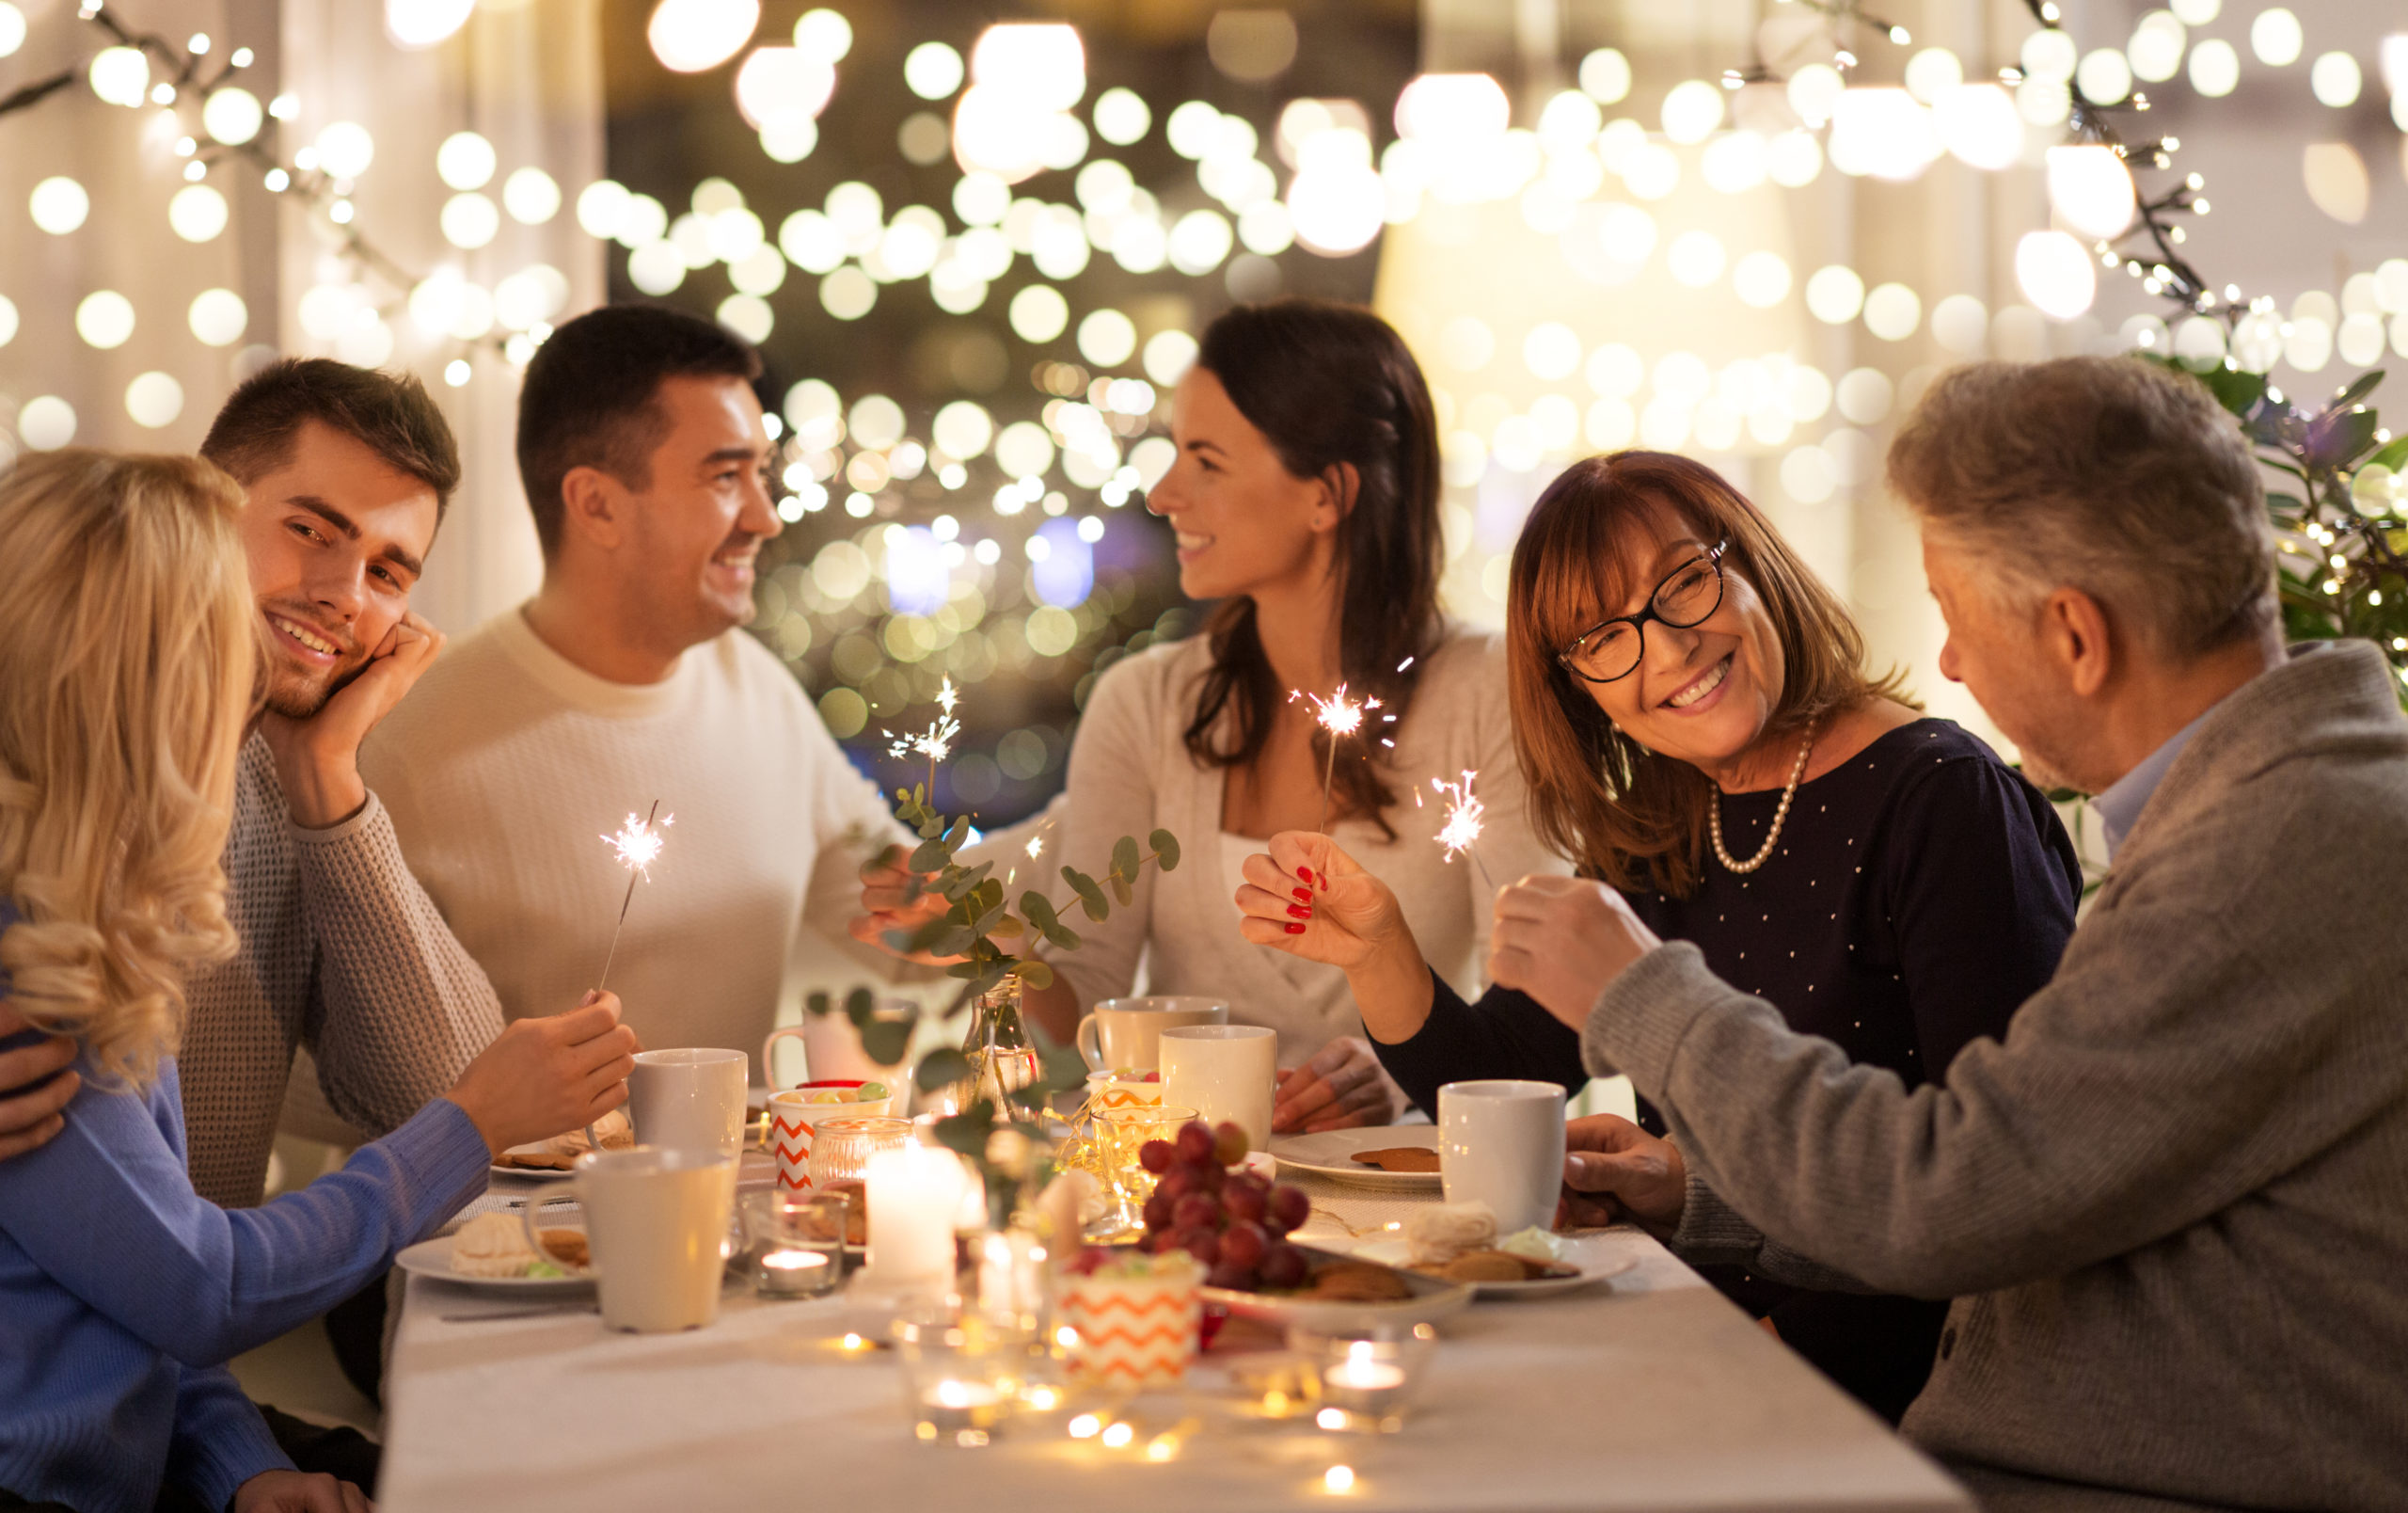 Suffering from Hearing Loss During the Holidays